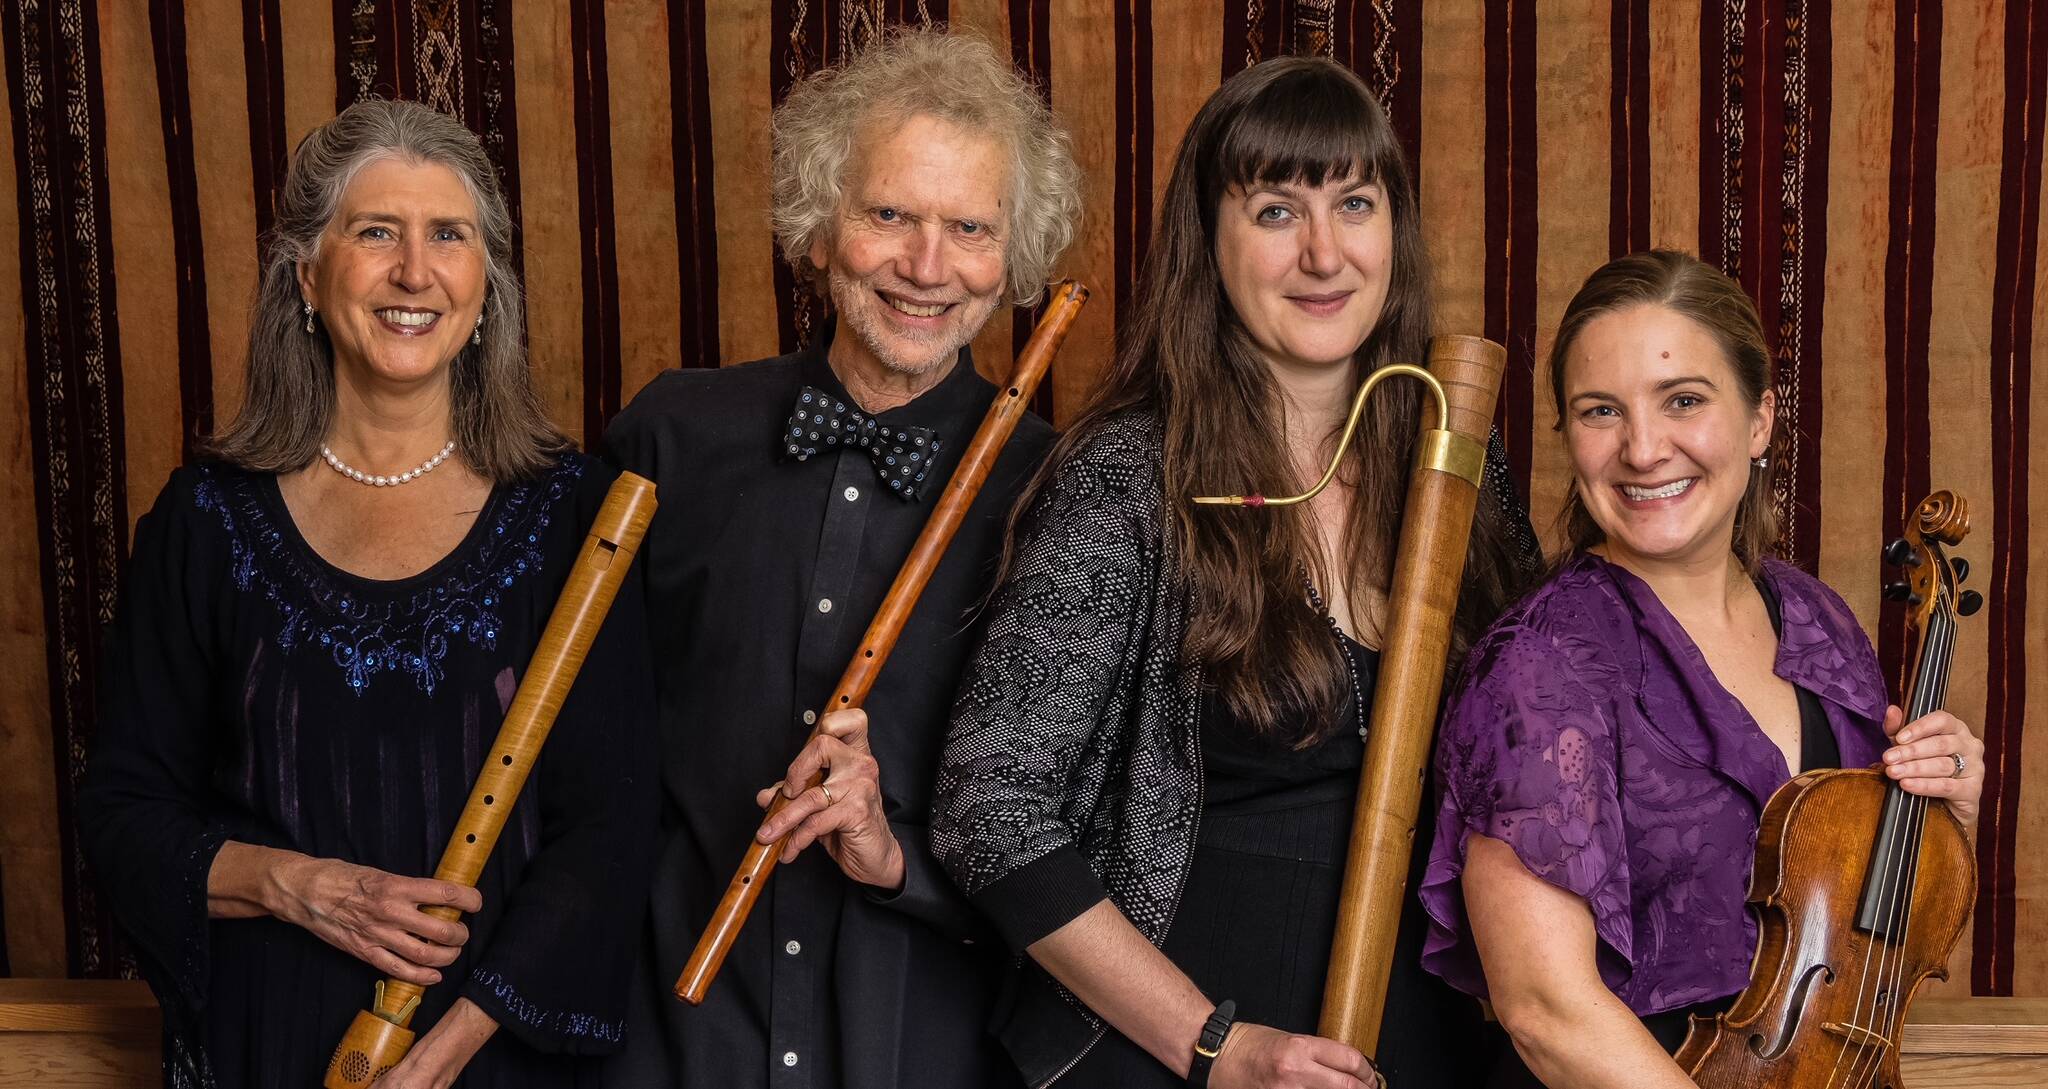 Contributed by the Salish Sea Early Chamber Music Festival